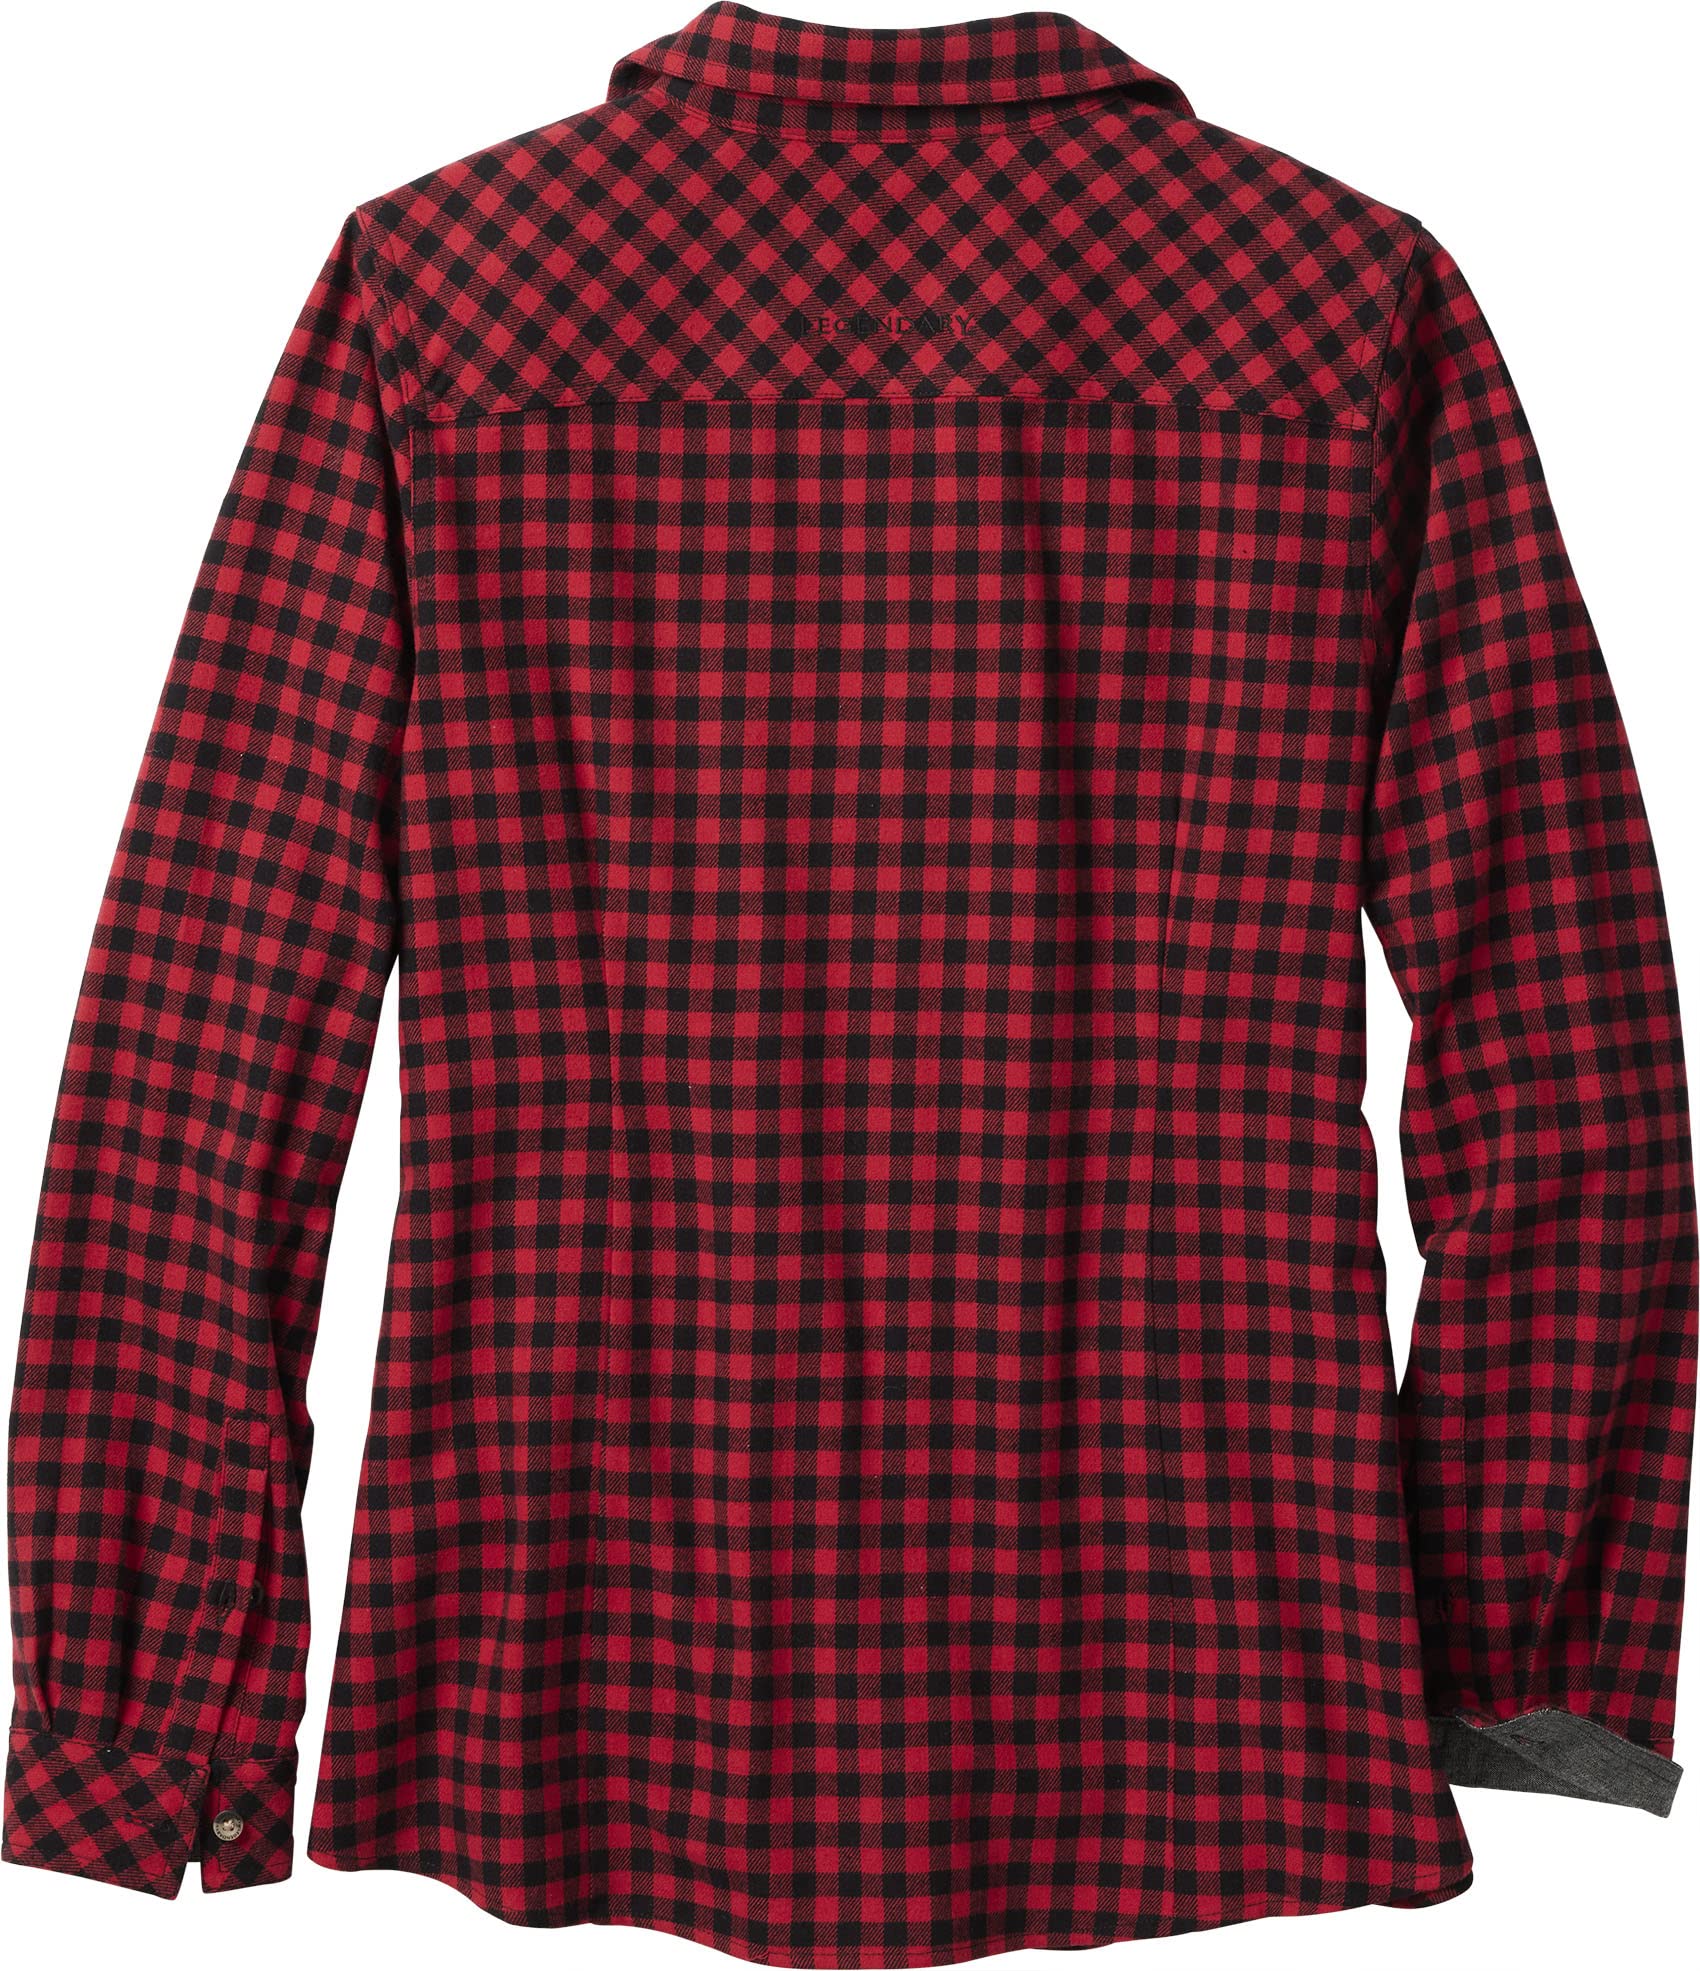 Women's Legendary Whitetails Cottage Escape Flannel Shirt-Size Small Only-$4.55